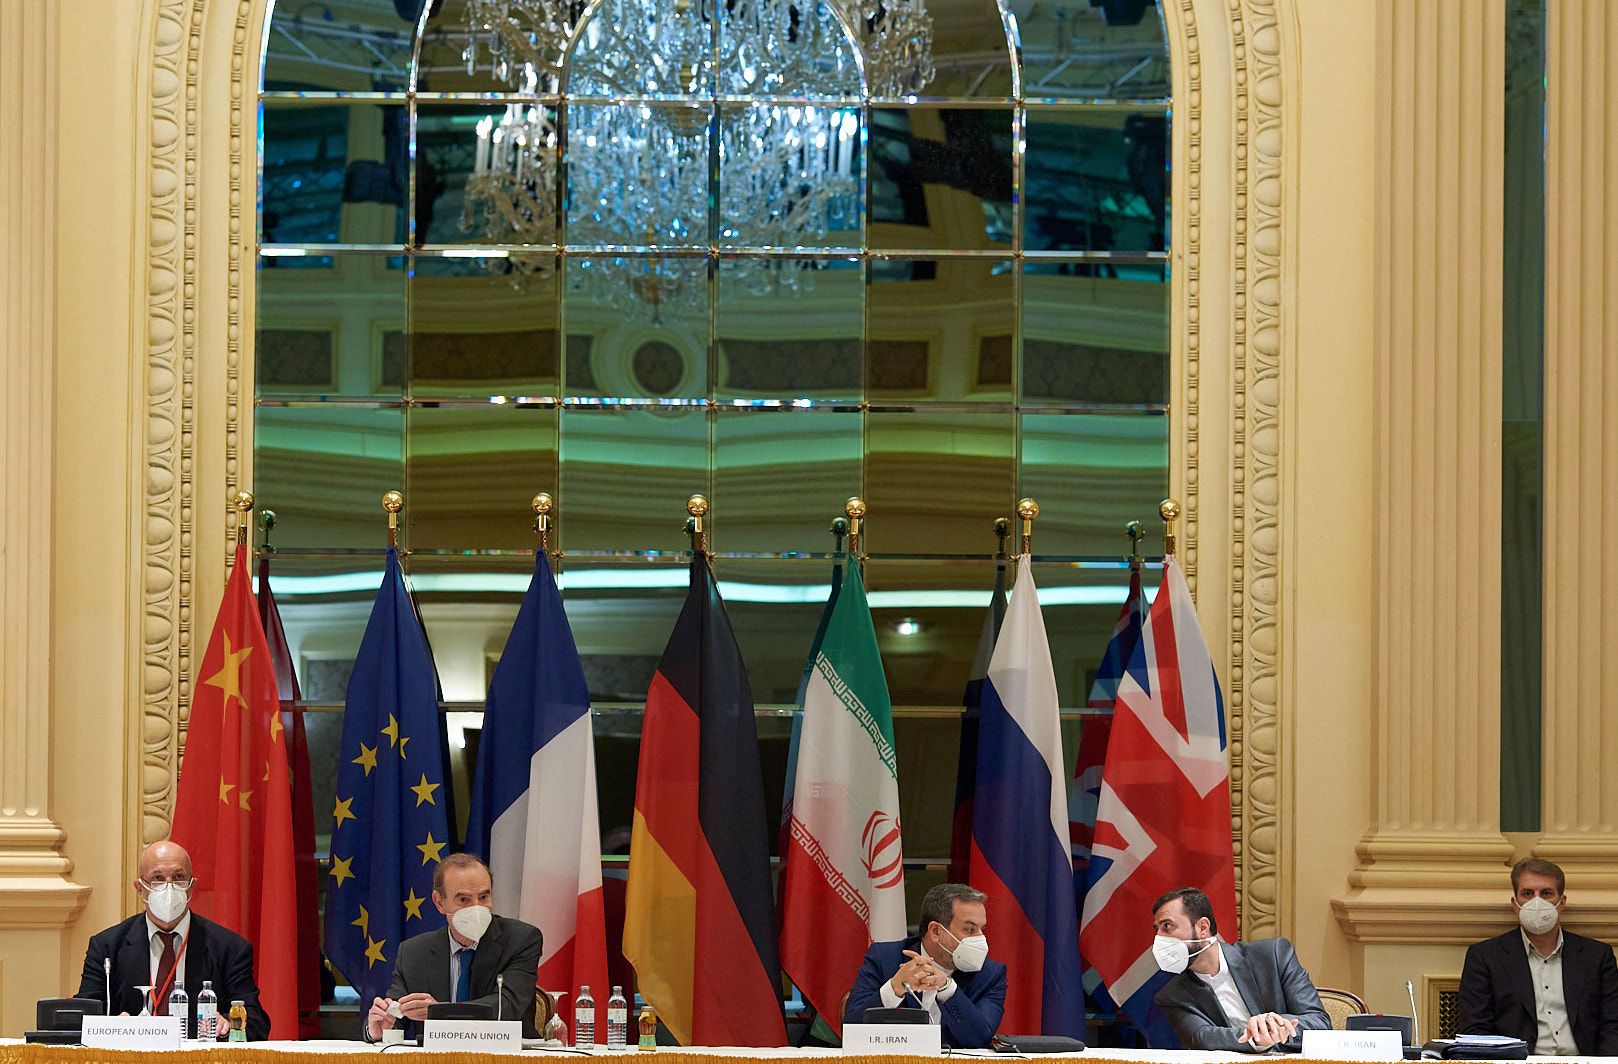 Delegation members from the parties to the Iran nuclear deal - Germany, France, Britain, China, Russia and Iran – attending a meeting in Vienna on 1 May, 2021 (AFP)